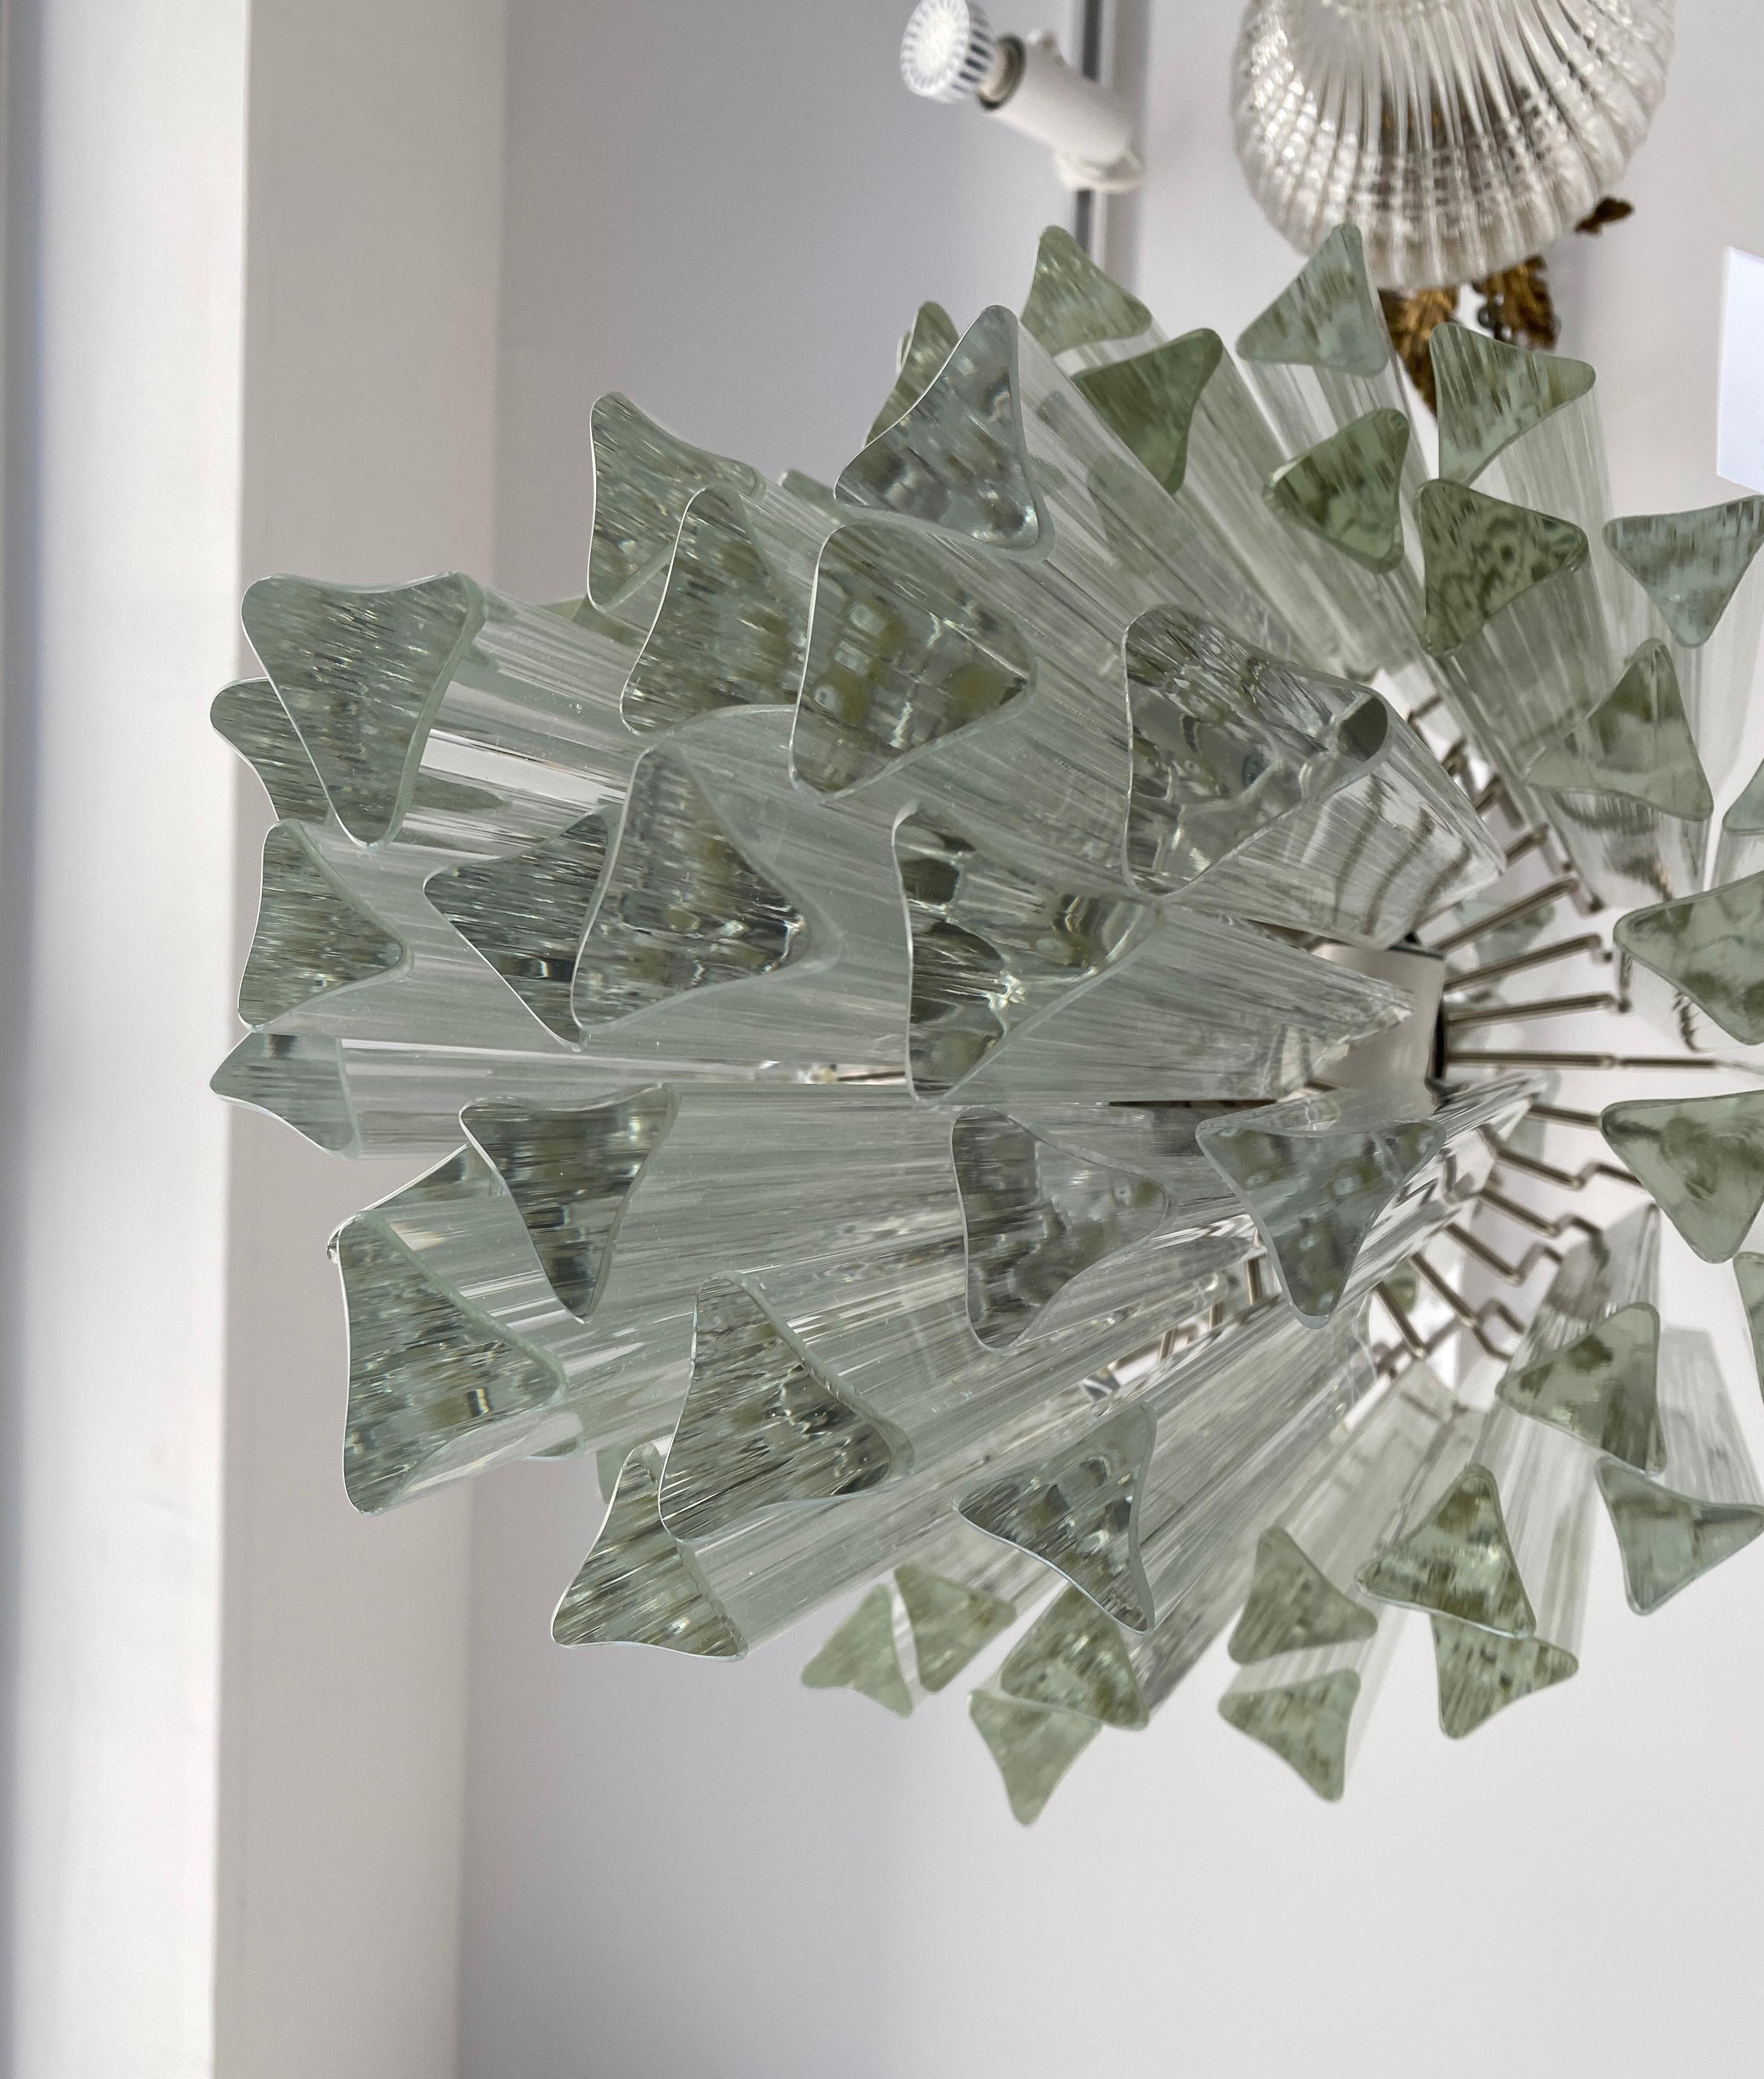 Stainless Steel Venini Murano Glass Chandelier $4800 w Tag for Camer Glass